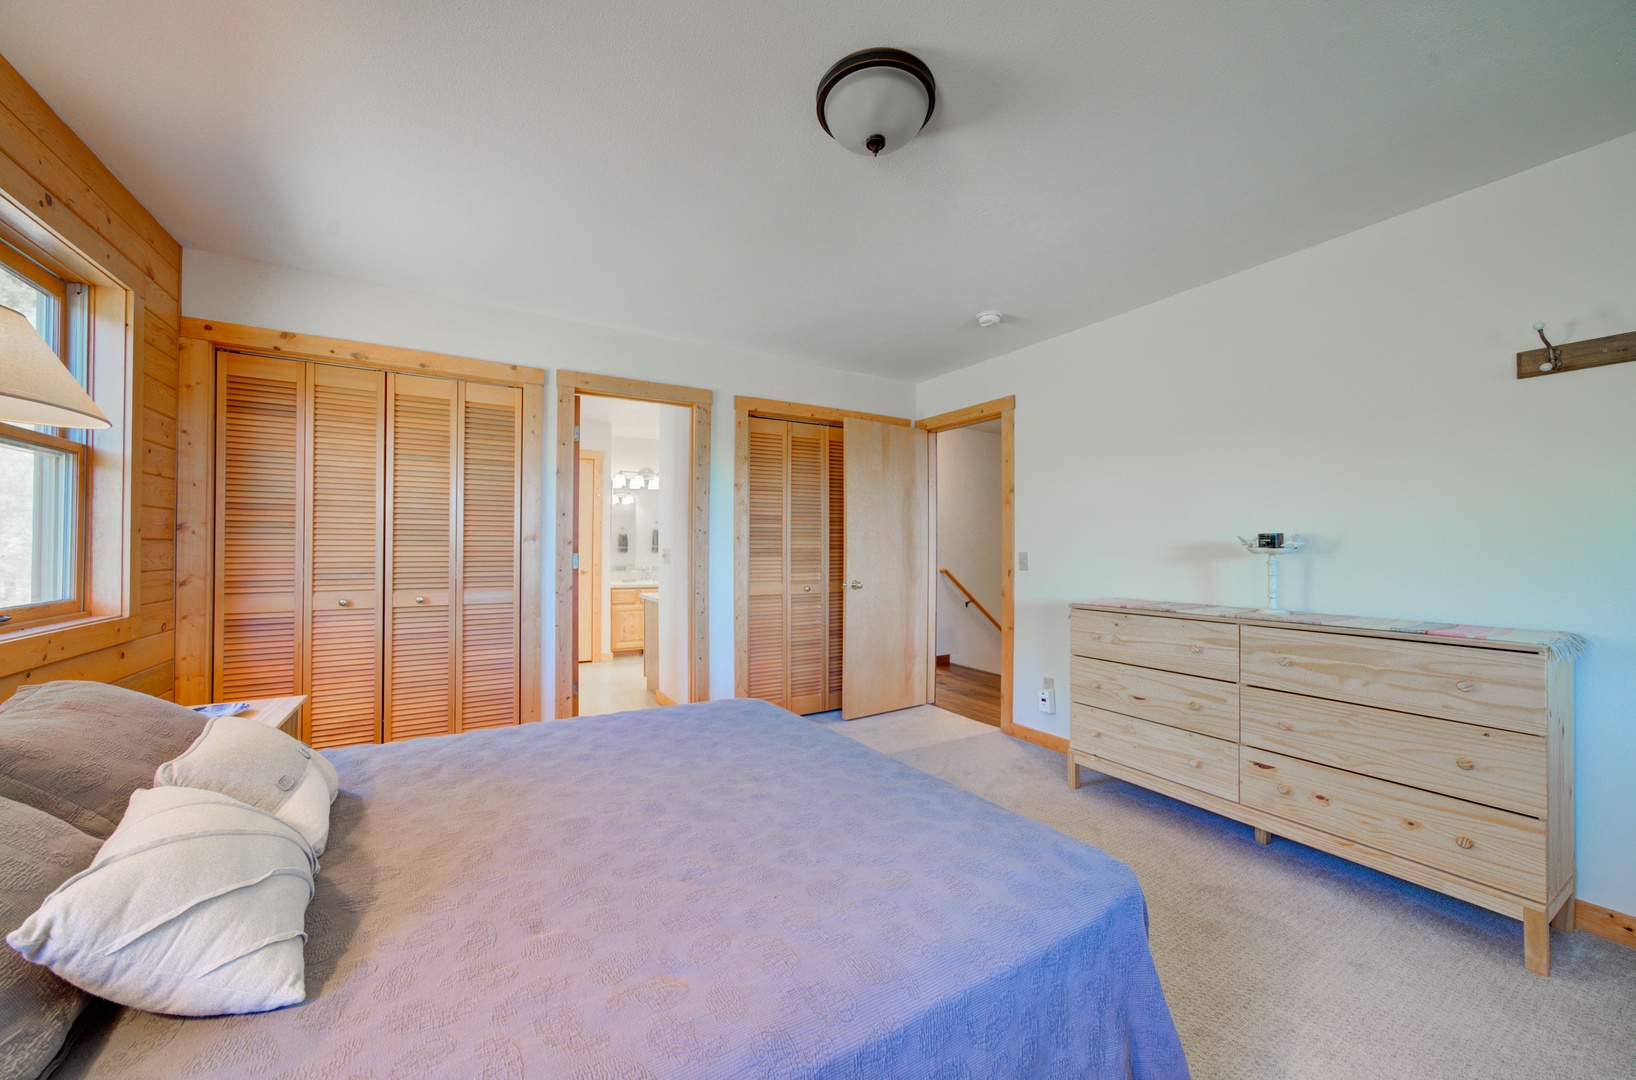 Bozeman Vacation Rentals, The Canyon Lookout - Plenty of closets, and attached bath